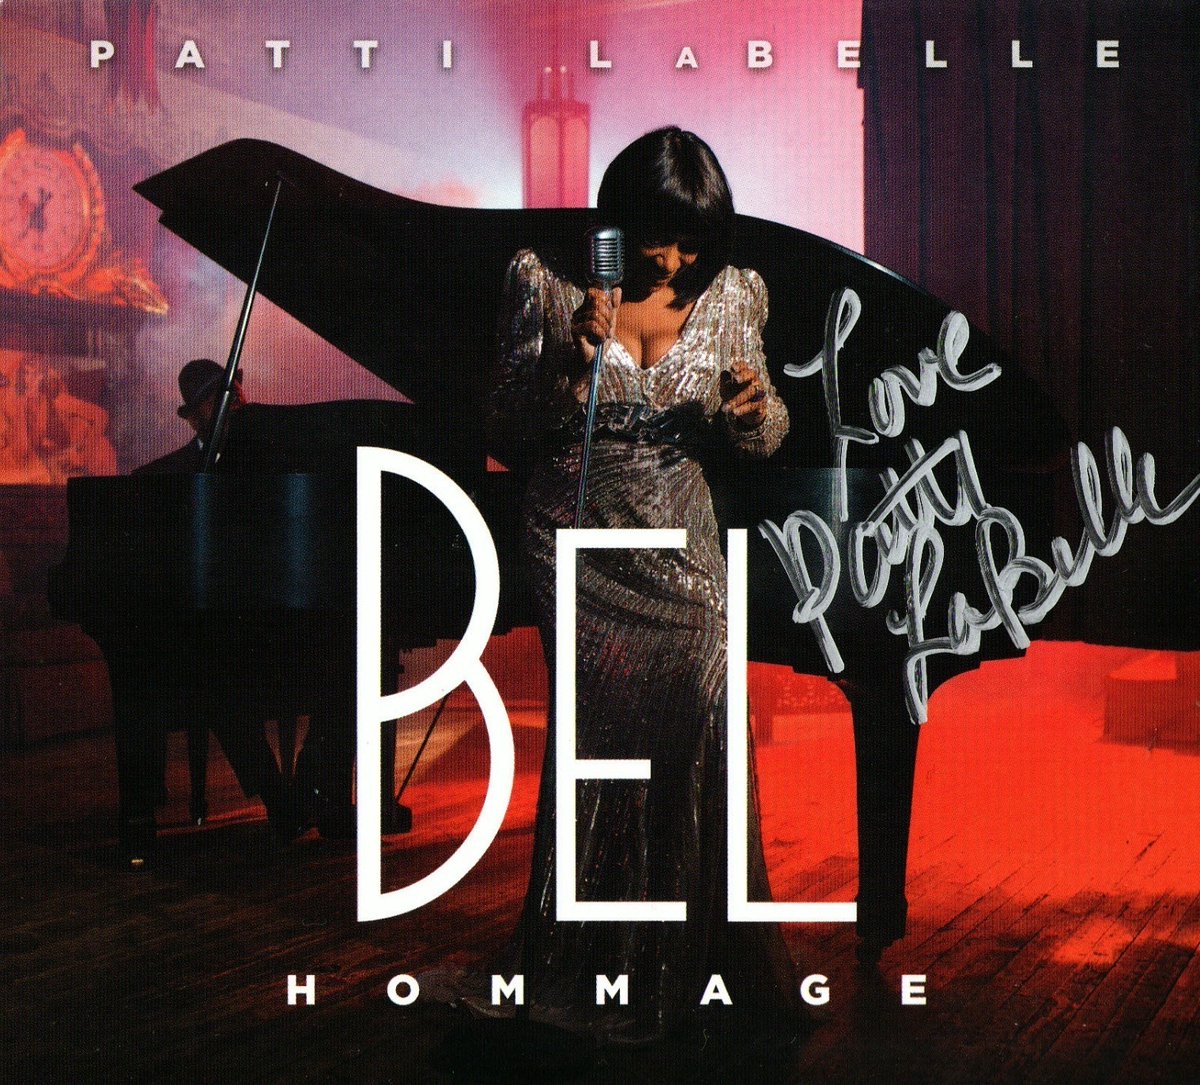 Happy birthday to the “Godmother of Soul”, @MsPattiPatti! 🎂❤️
“Bel Hommage” CD signed by LaBelle for @newburycomics is from our collection.
#PattiLaBelle #BelHommage #Labelle #PattiLaBelleandtheBluebelles #LadyMarmalade #OutAllNight #AmericanHorrorStory #DWTS #NewburyComics